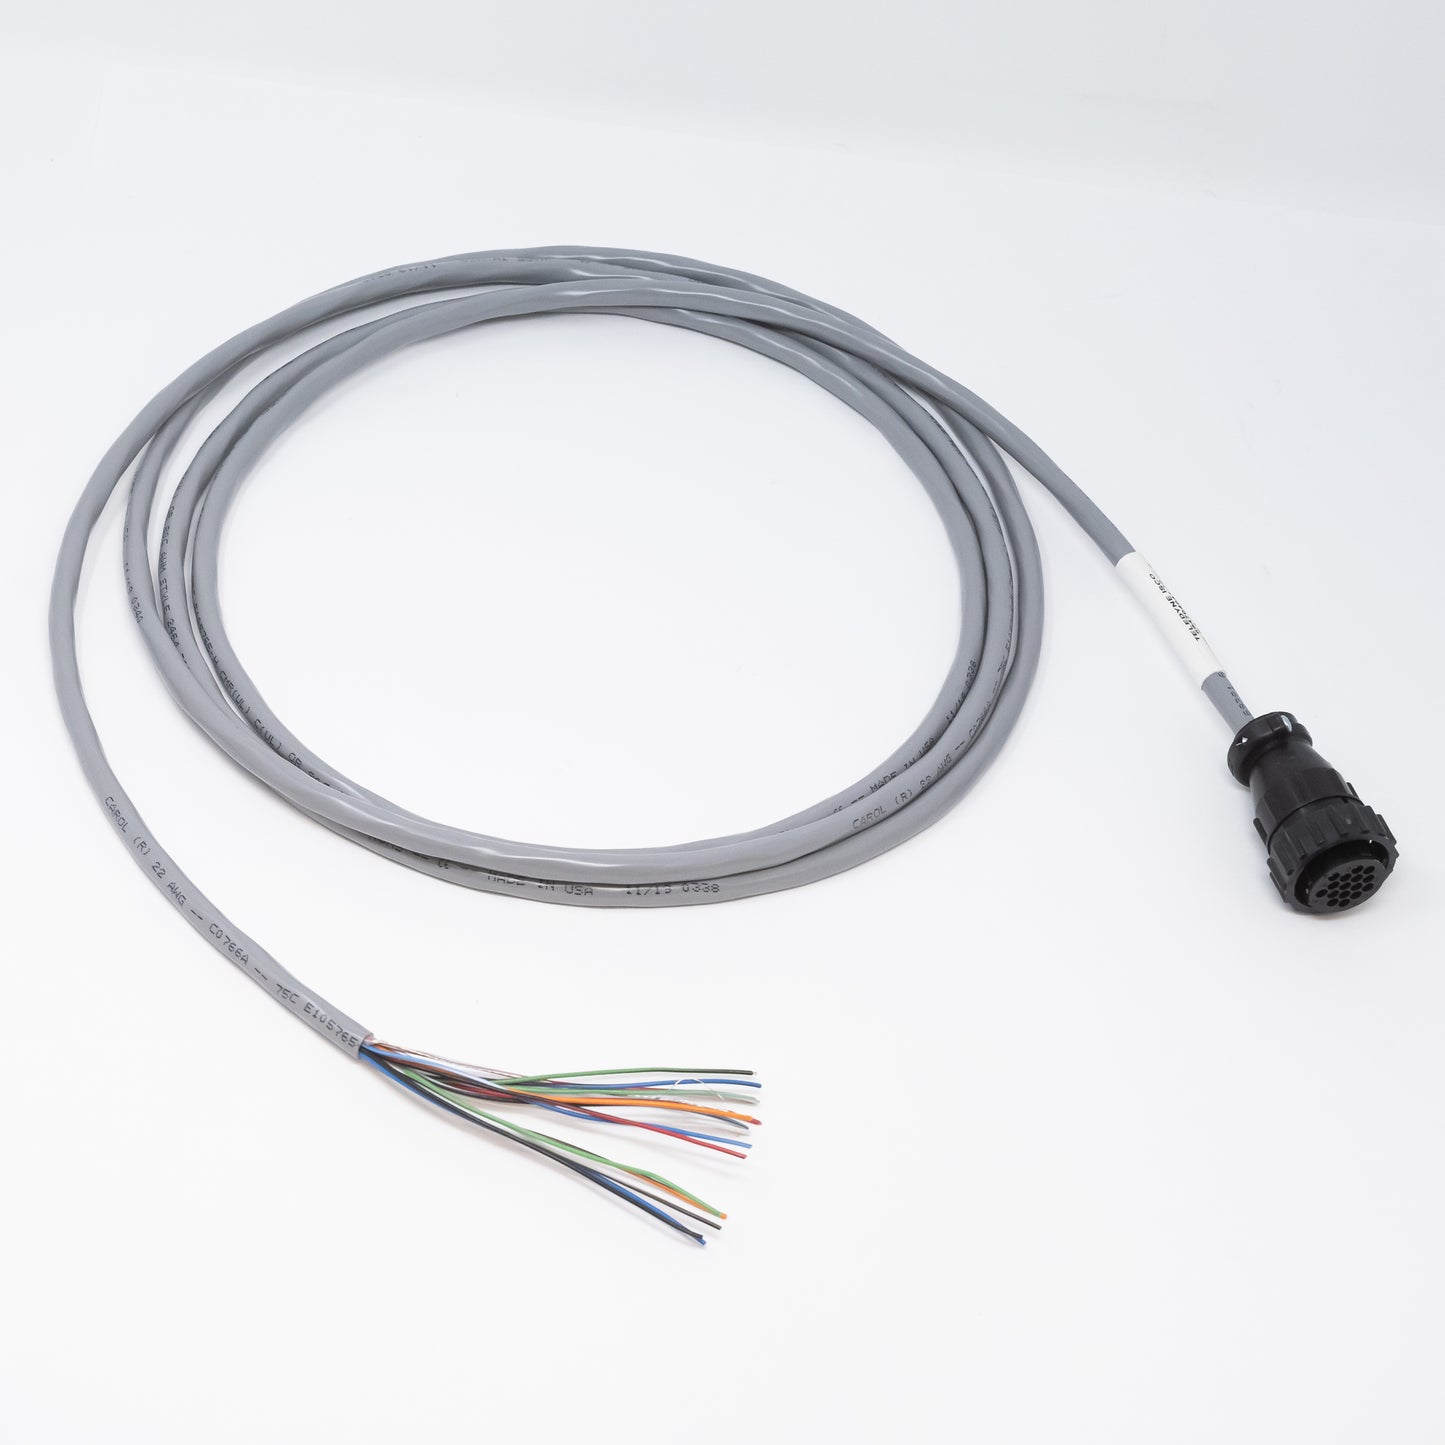 Cable with connector on one end, leads on other end